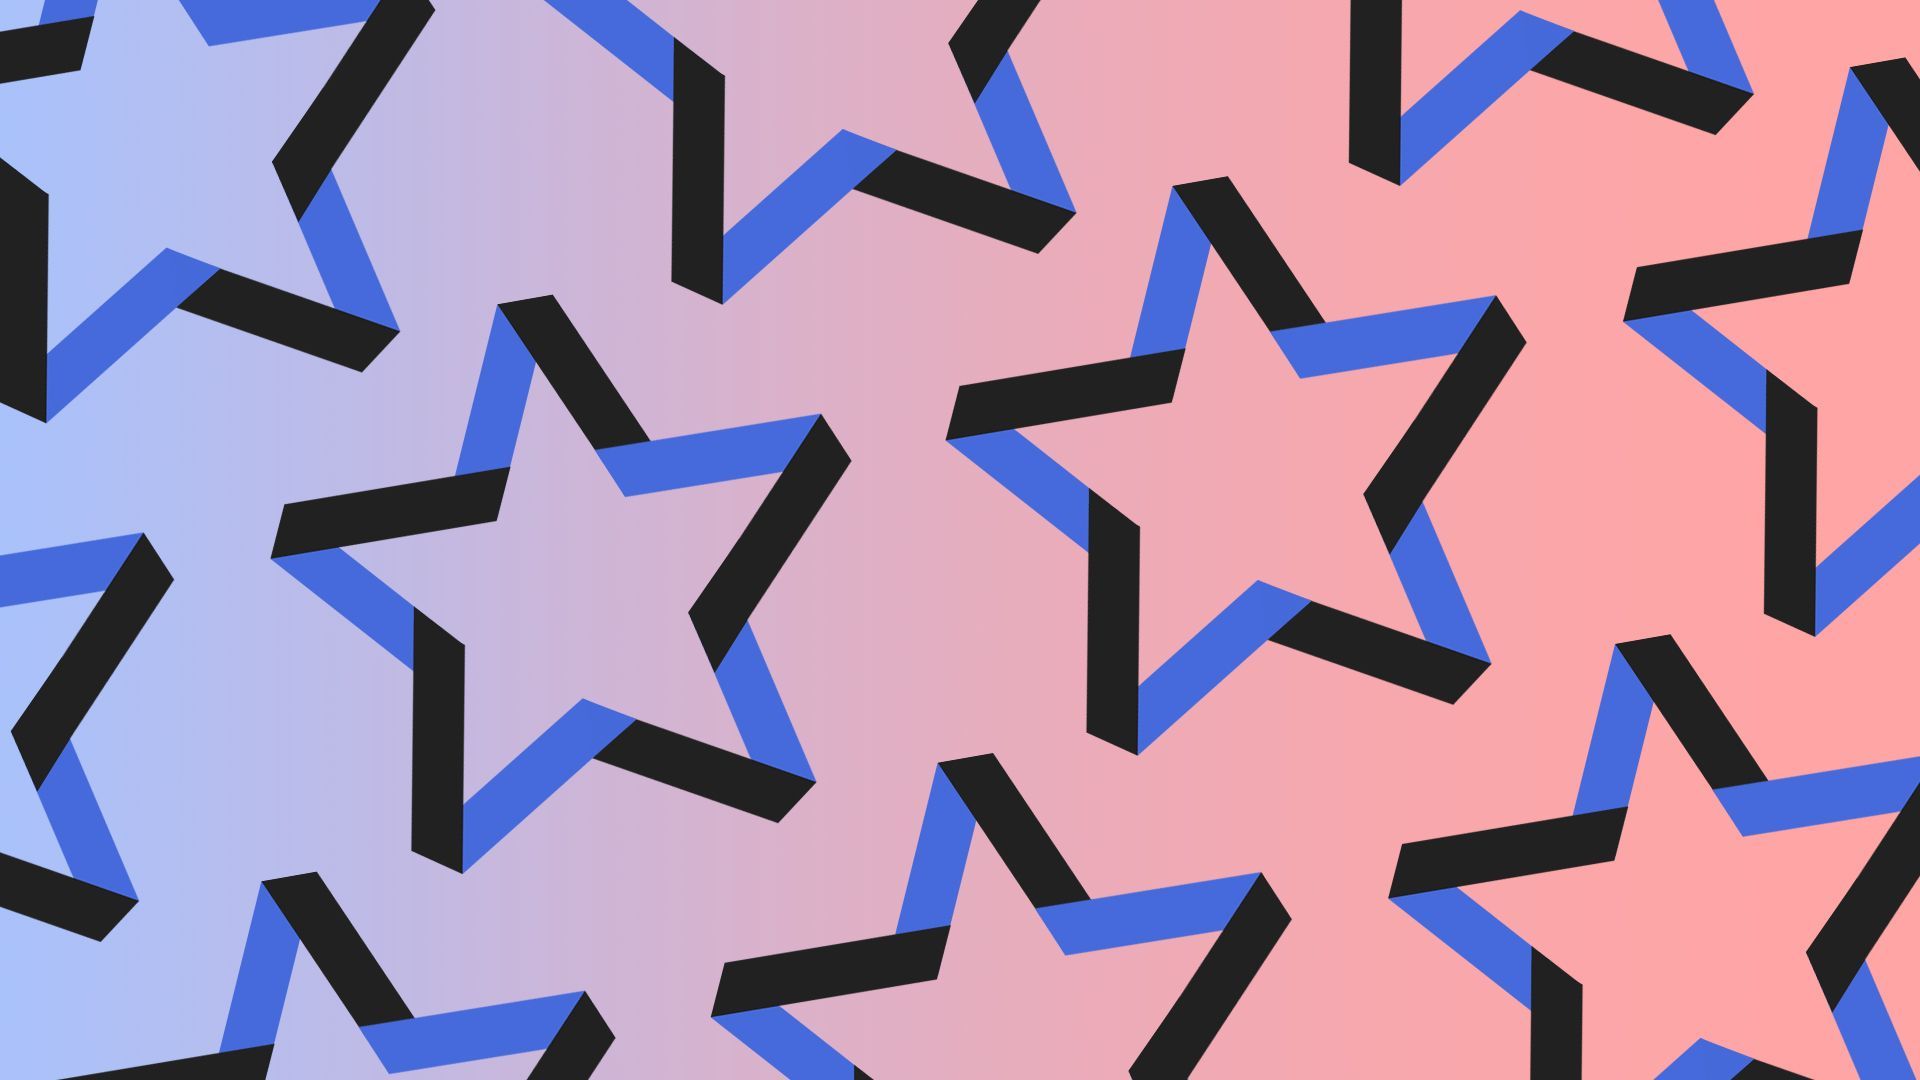 Illustration of a repeating star pattern made from the Axios logo